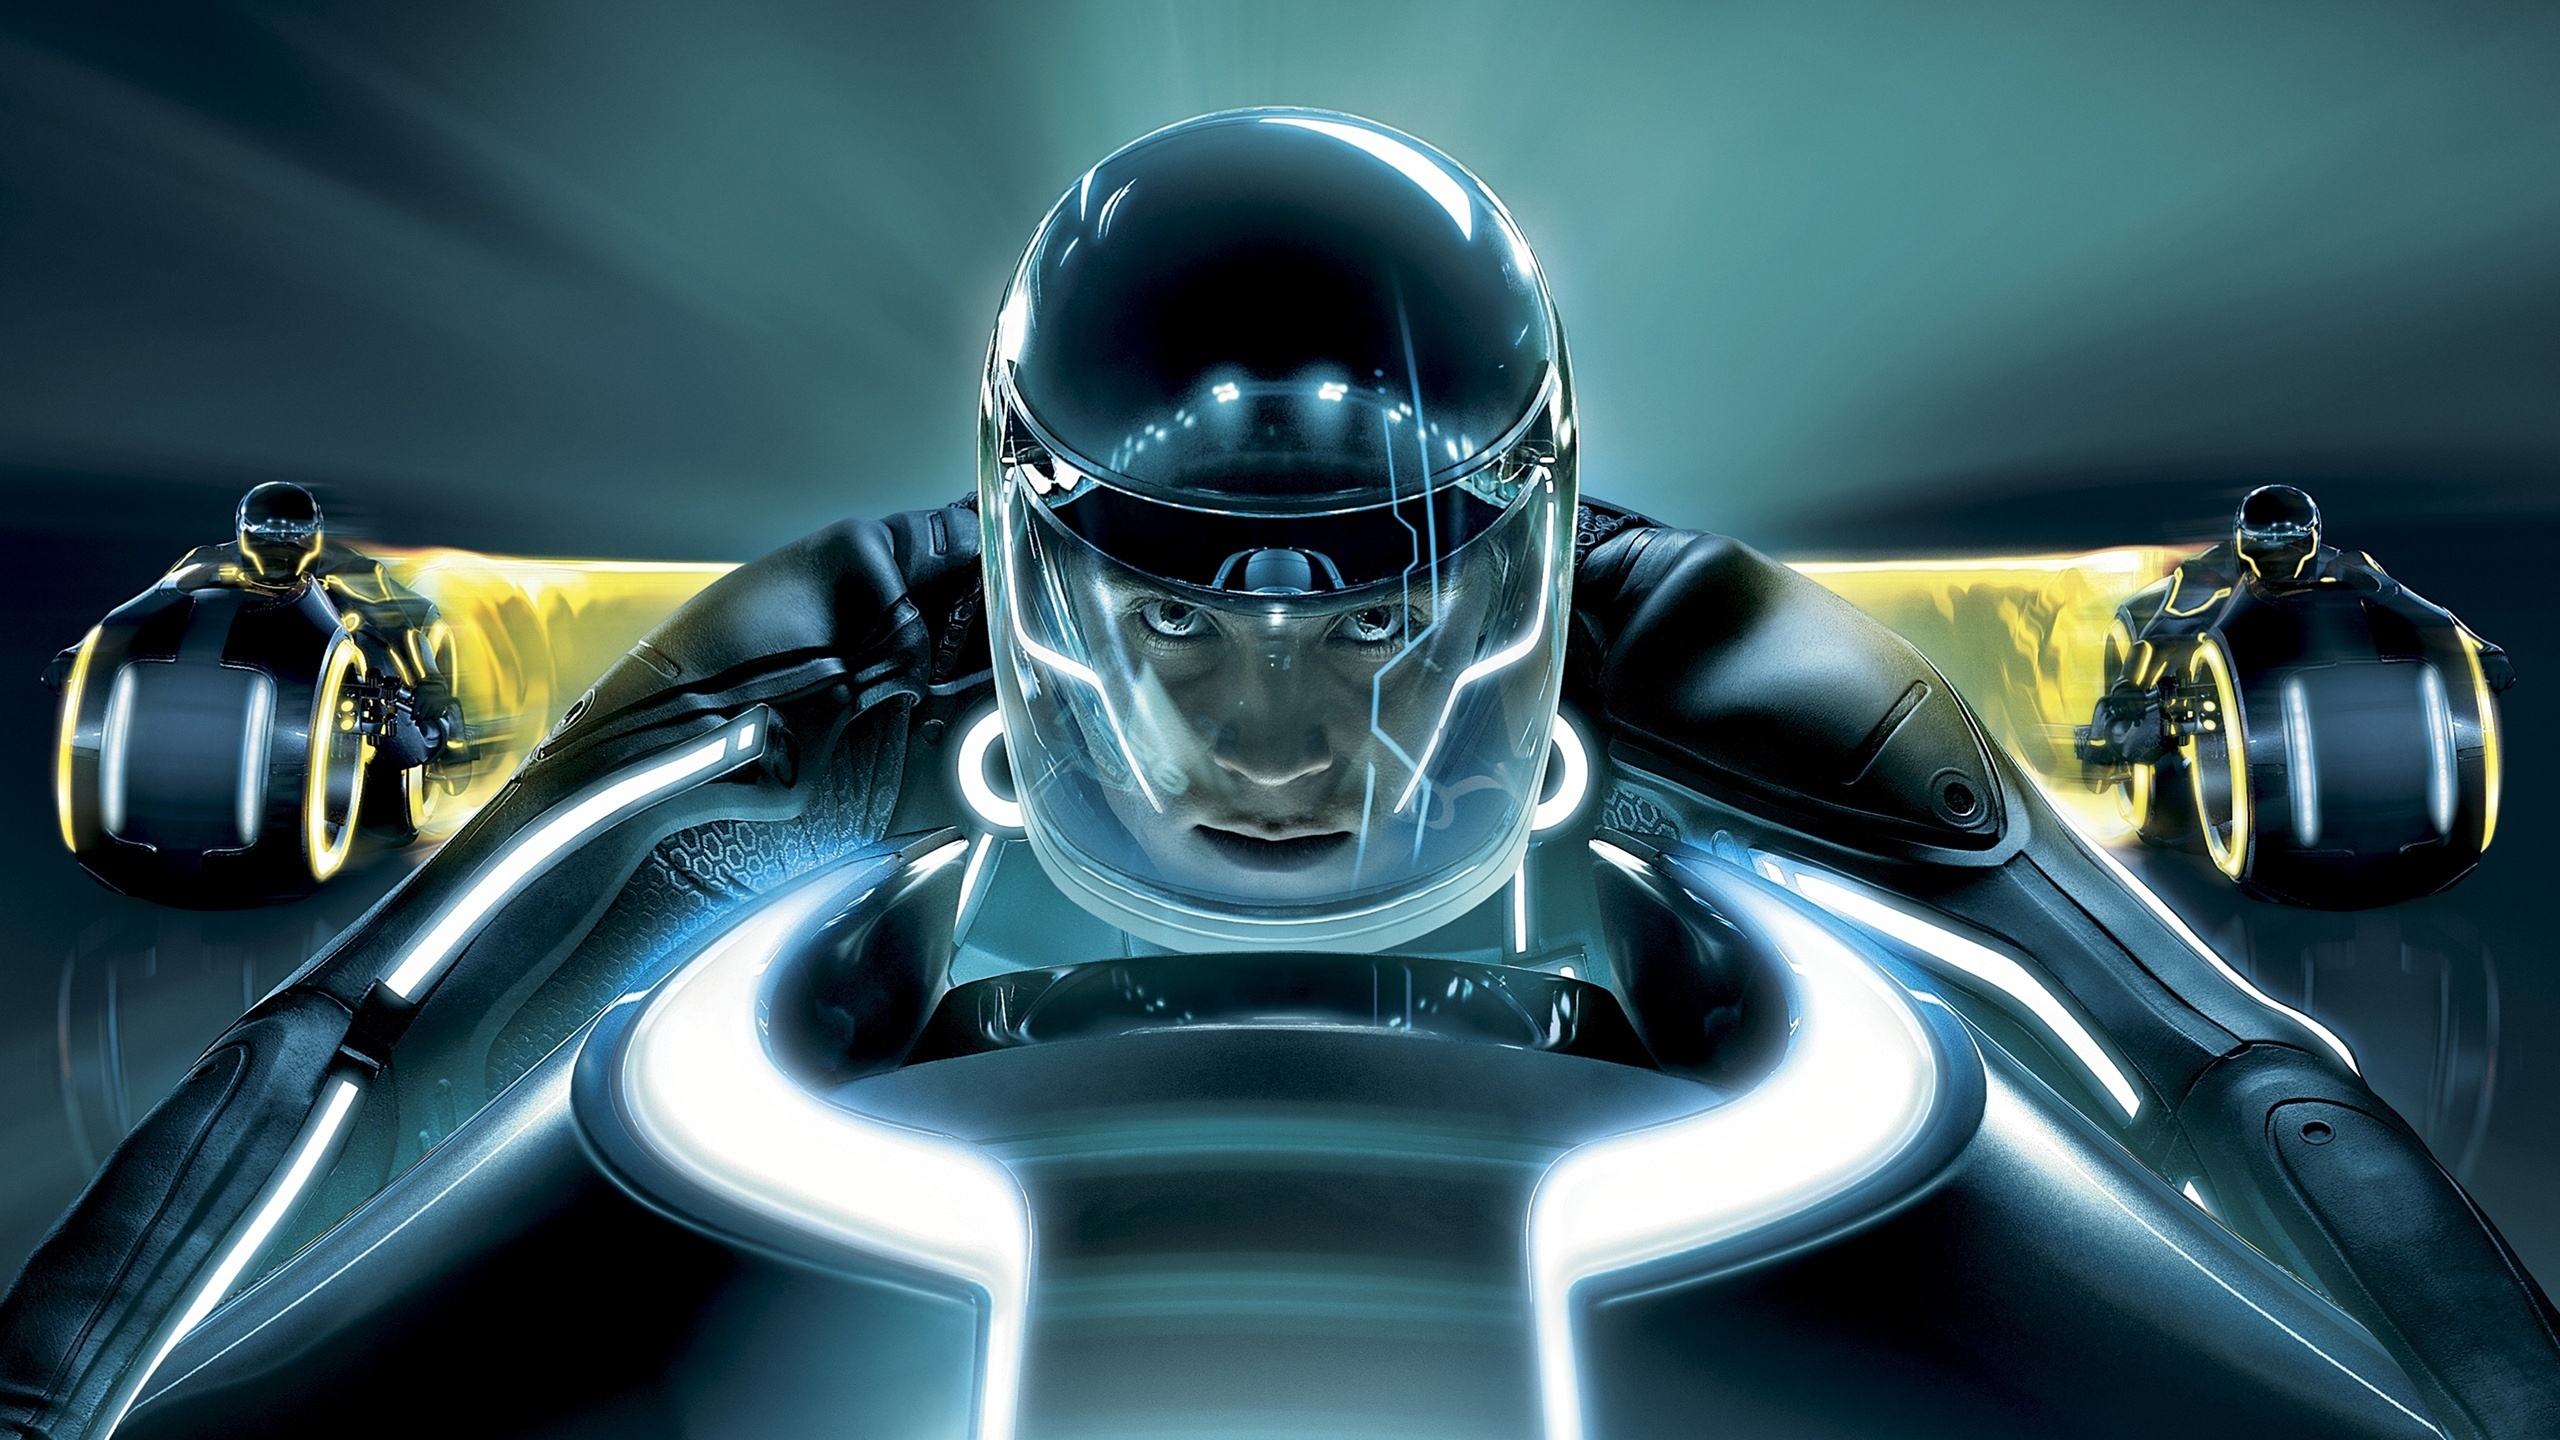 Tron Legacy Movie for 2560x1440 HDTV resolution